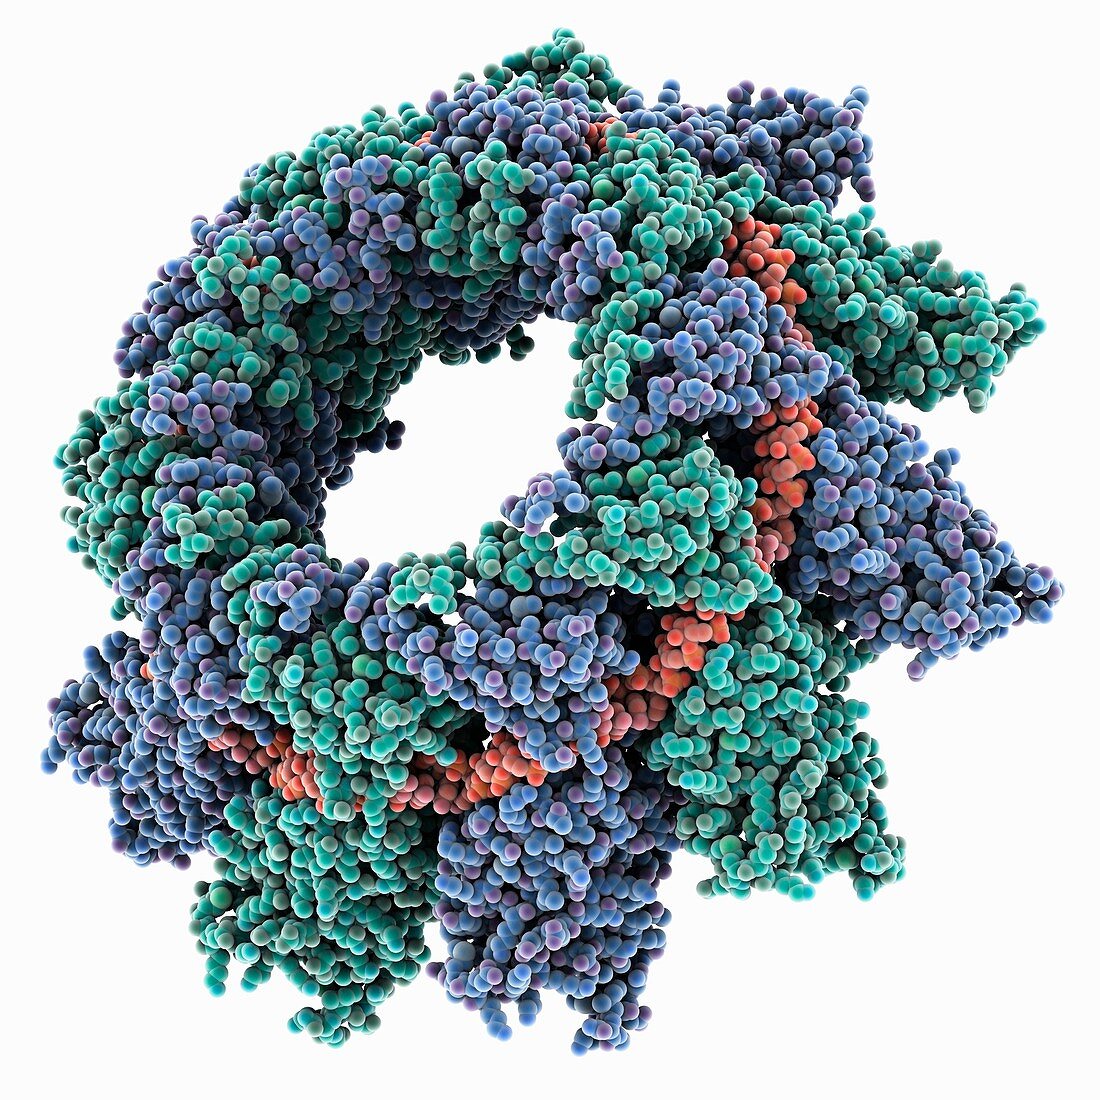 Respiratory syncytial virus nucleocapsid